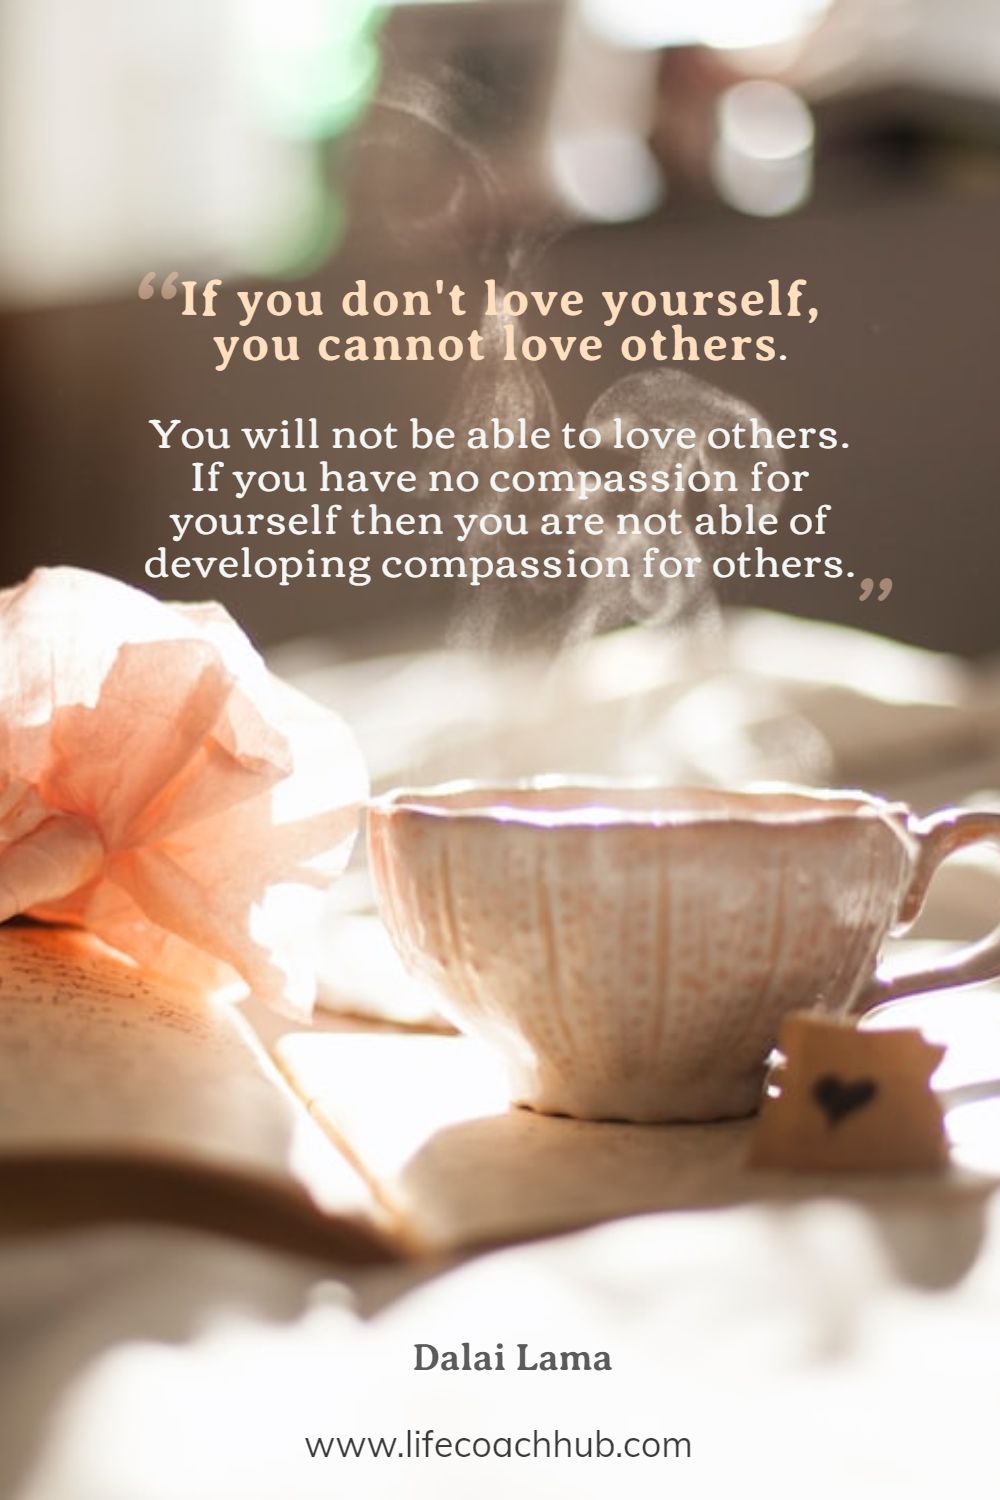 If you don't love yourself, you cannot love others. You will not be able to love others. If you have no compassion for yourself then you are not able of developing compassion for others. Dalai Lama Coaching Quote